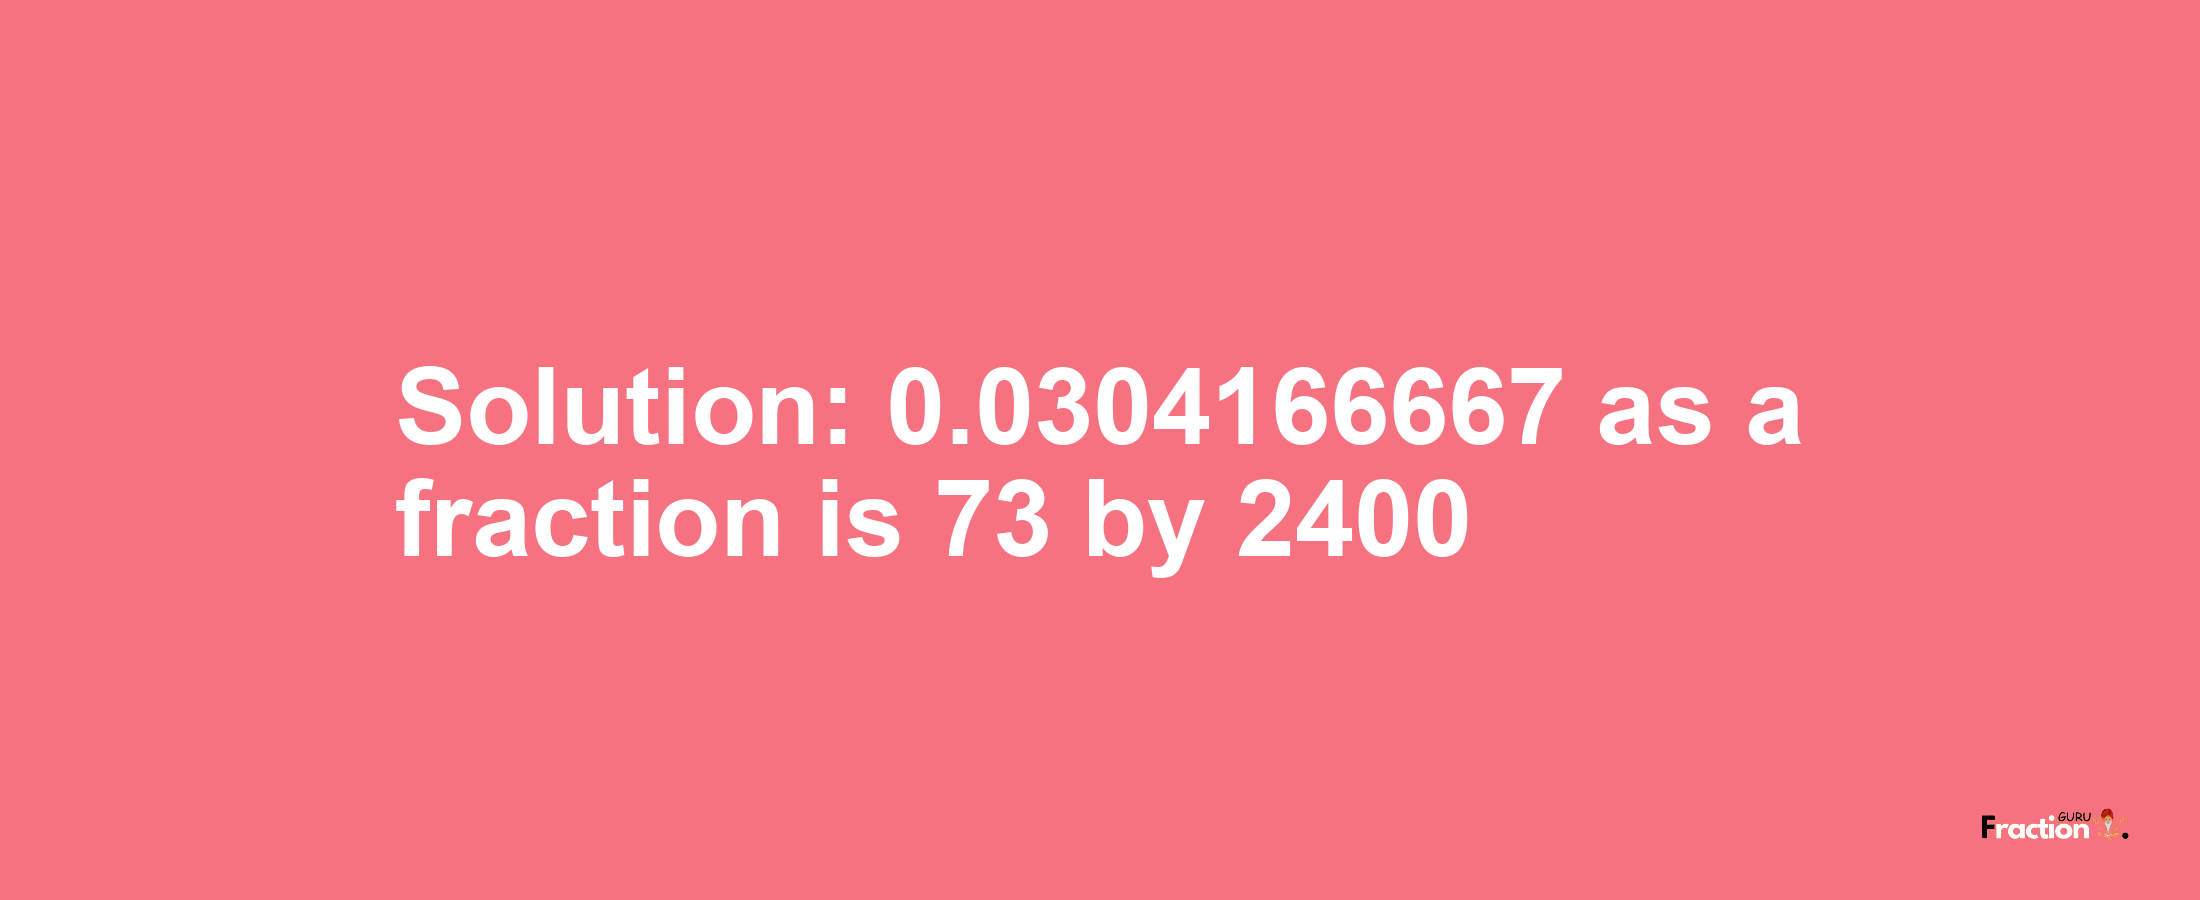 Solution:0.0304166667 as a fraction is 73/2400